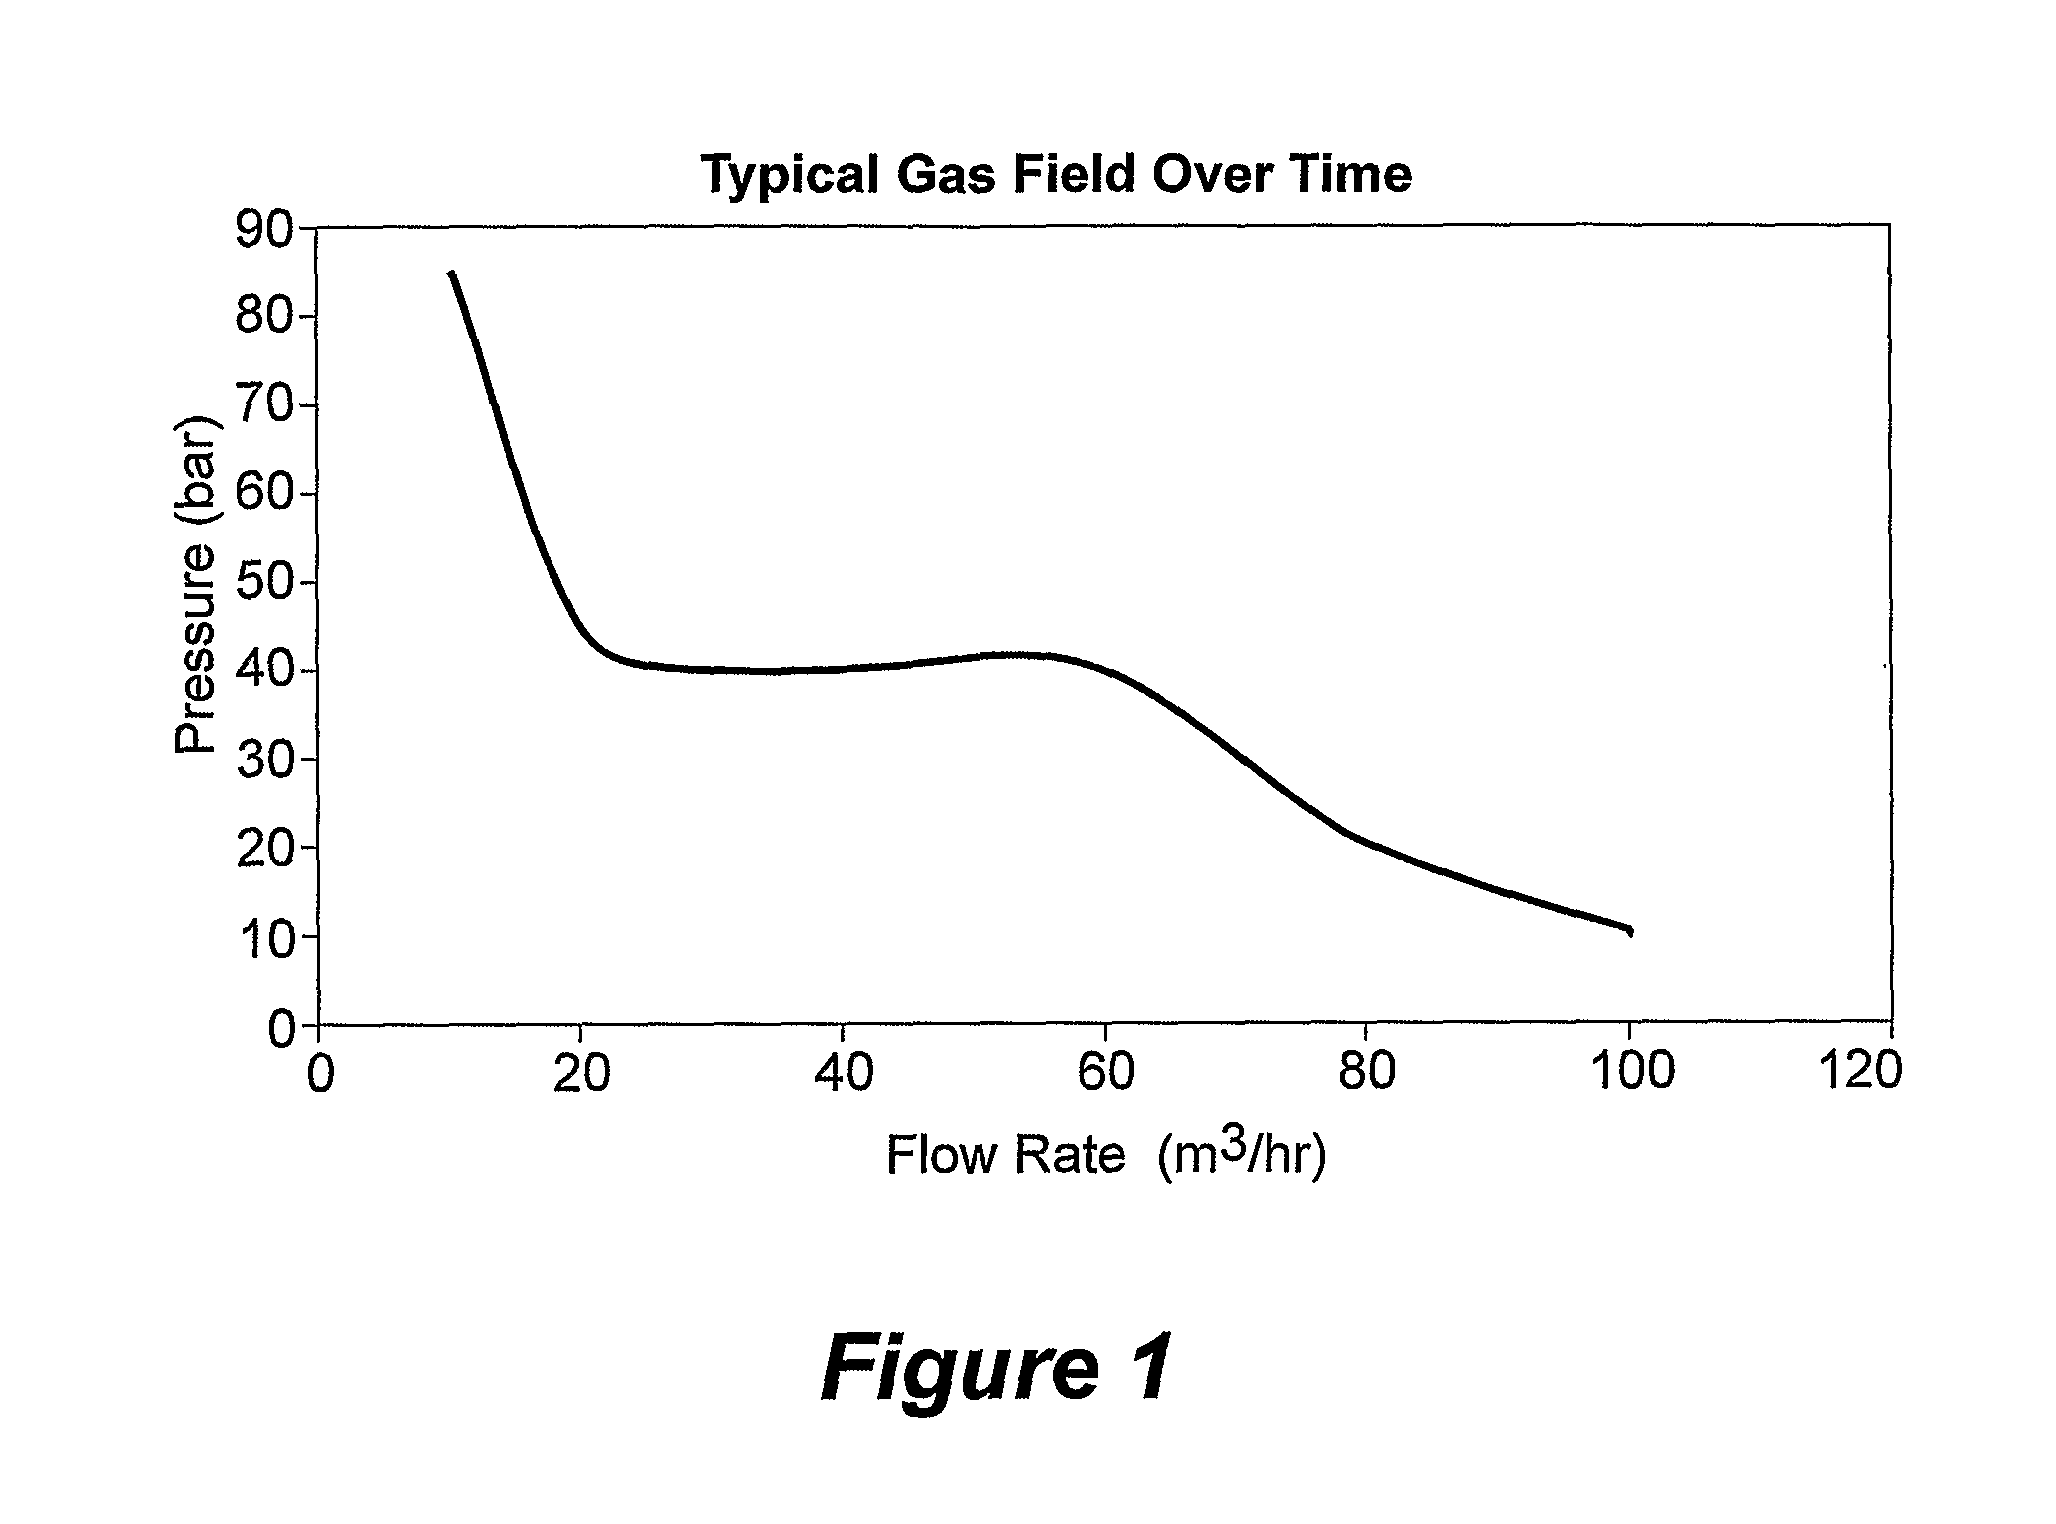 Cyclone Assembly and Method For Increasing or Decreasing Flow Capacity of a Cyclone Separator in Use